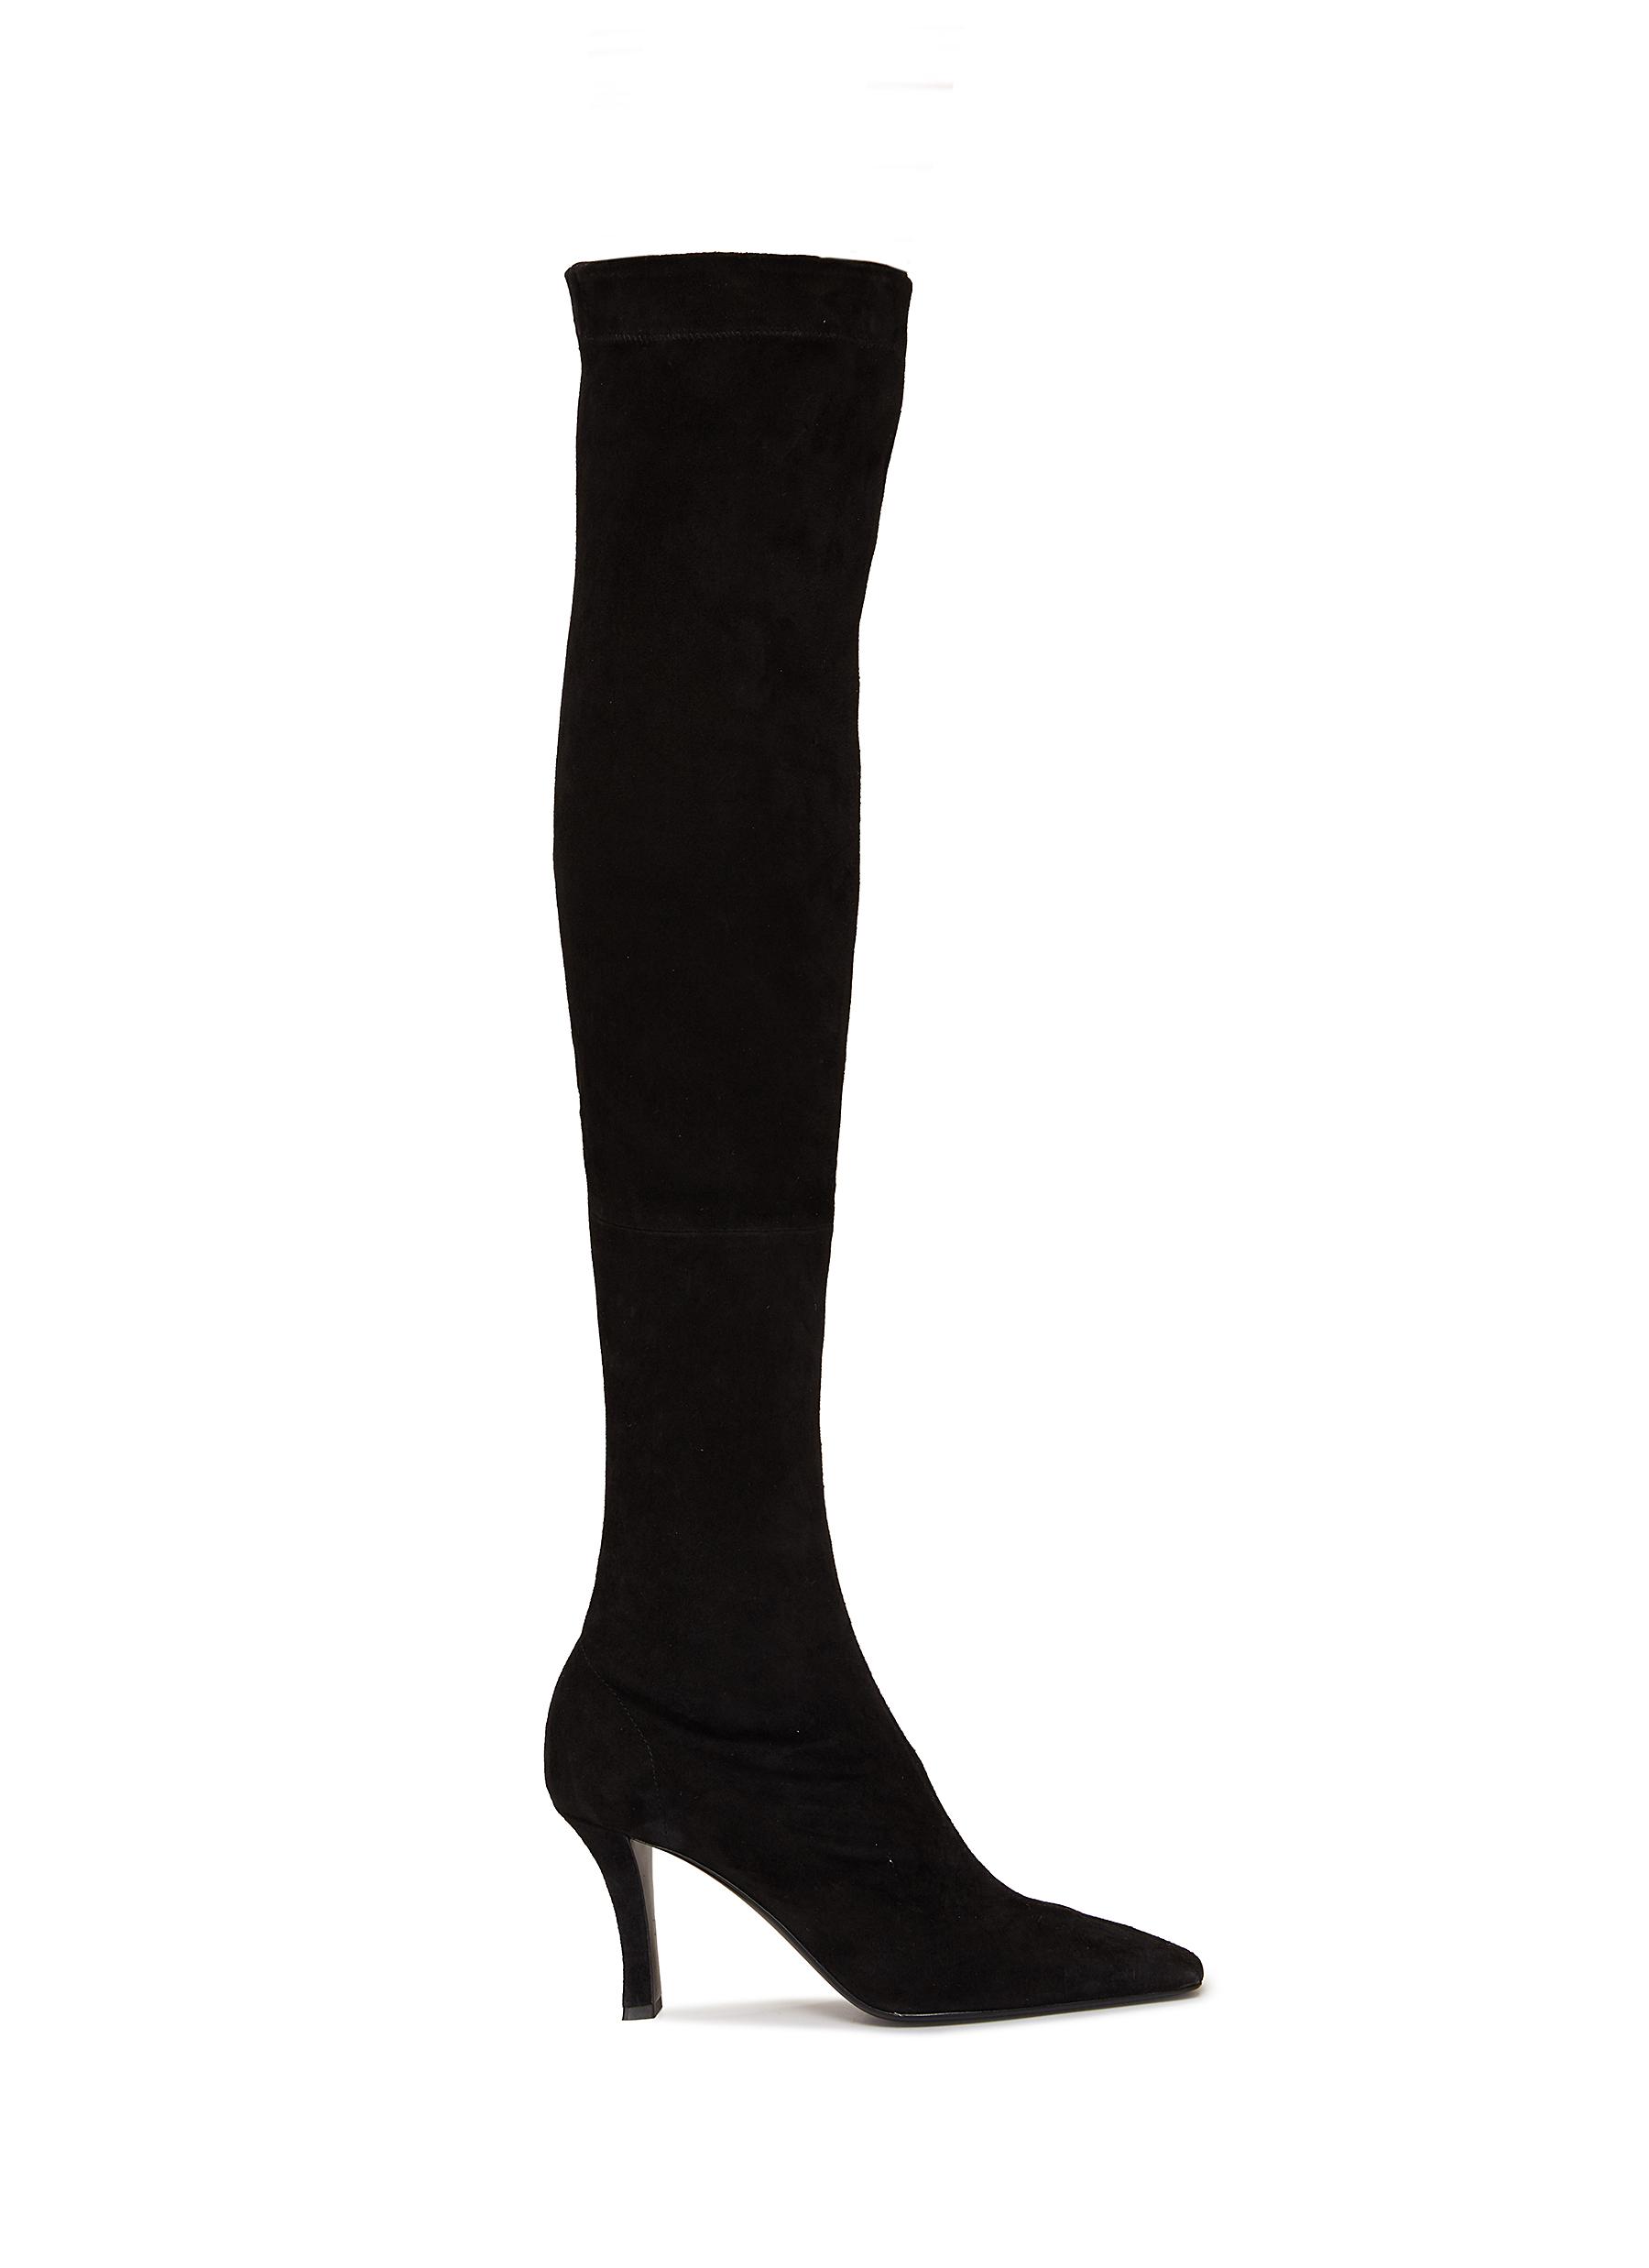 Annette Over The Knee Suede Boots